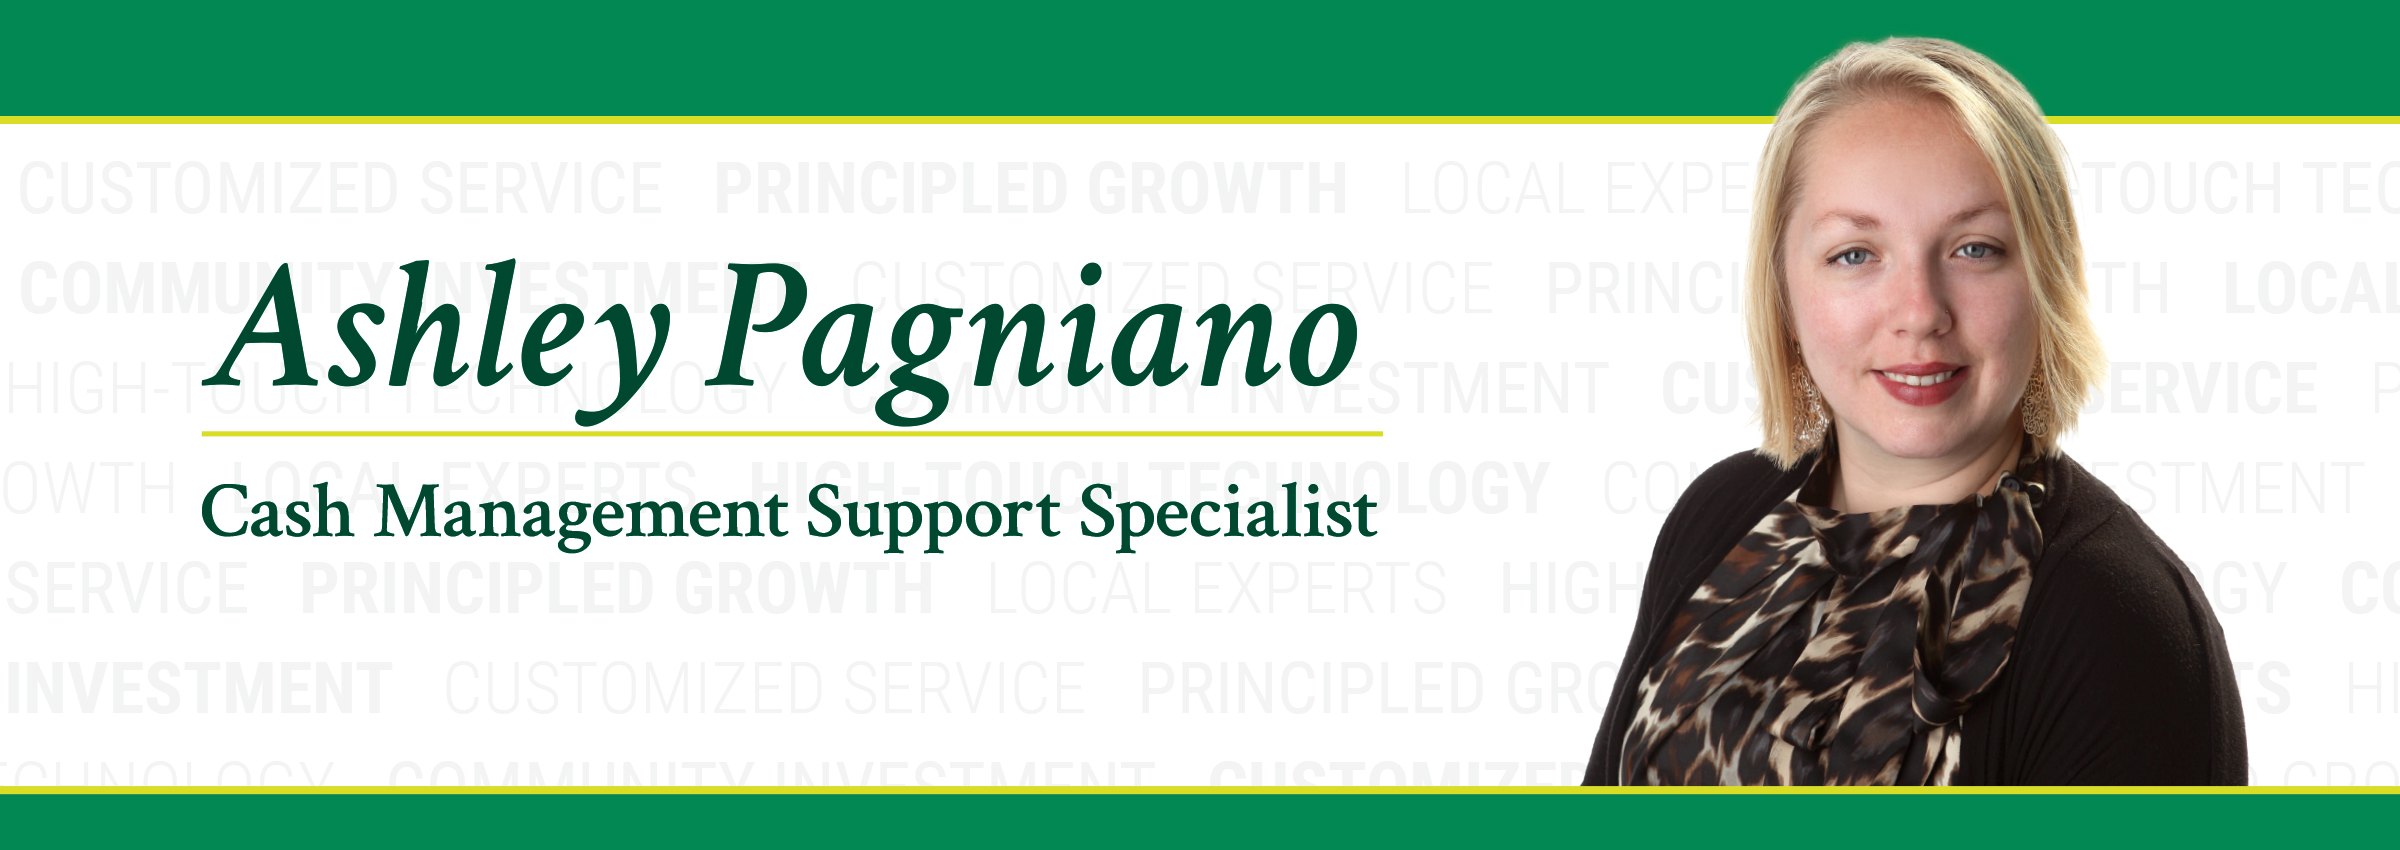 Ashley Pagniano Banner